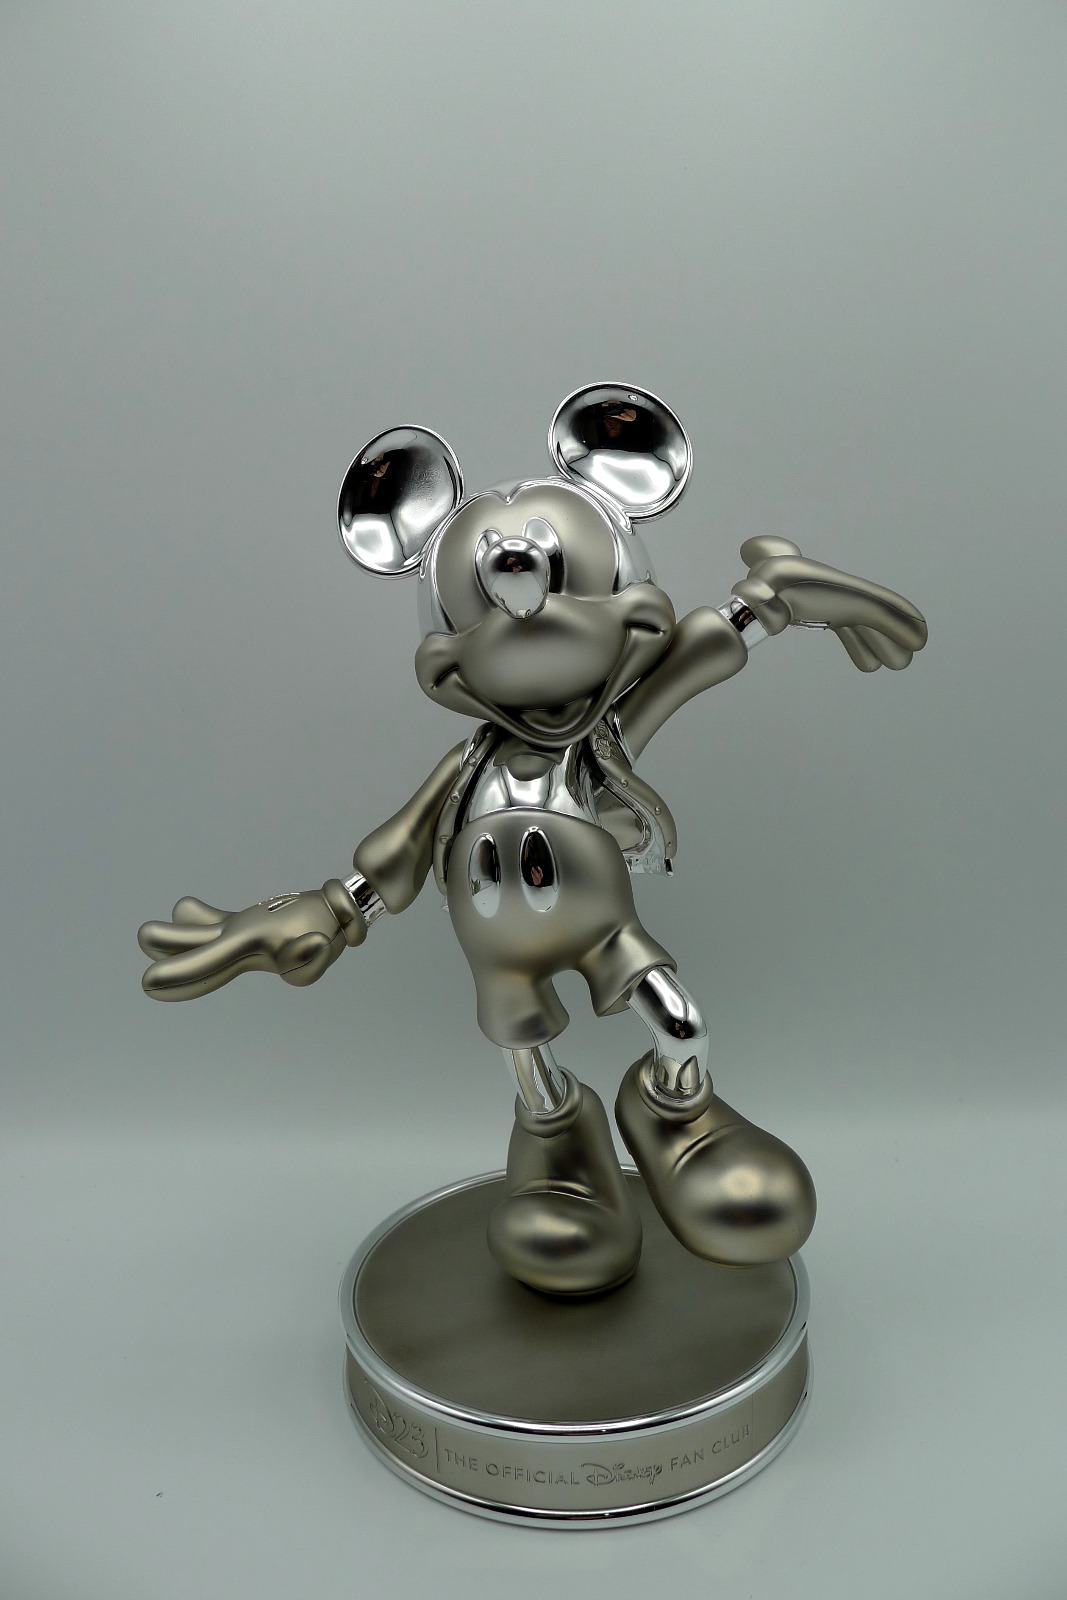 1923-2023 - 100 YEARS OF DISNEY - MICKEY MOUSE MILESTONE D23 STATUE